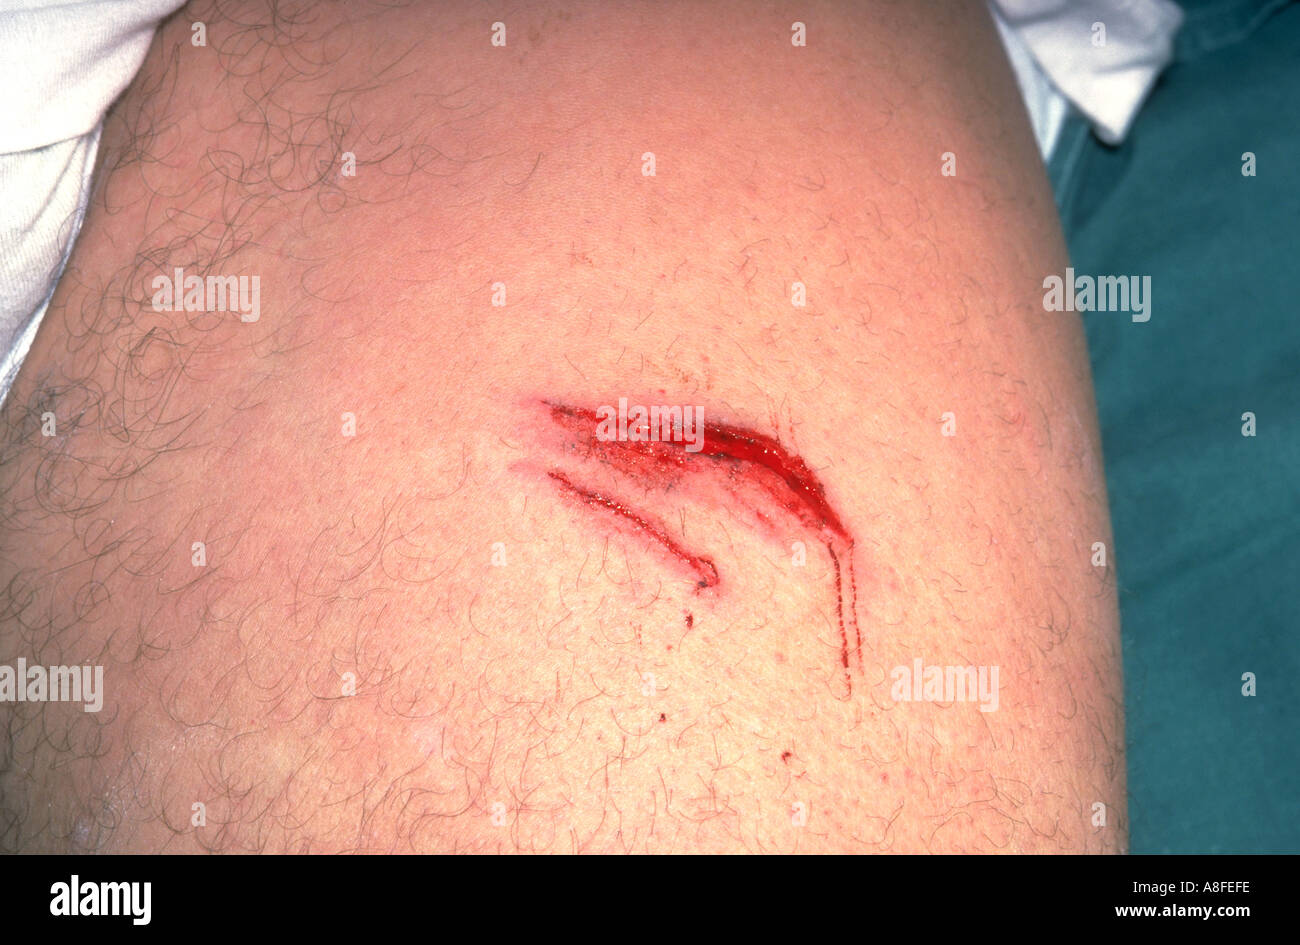 Laceration on thigh Stock Photo